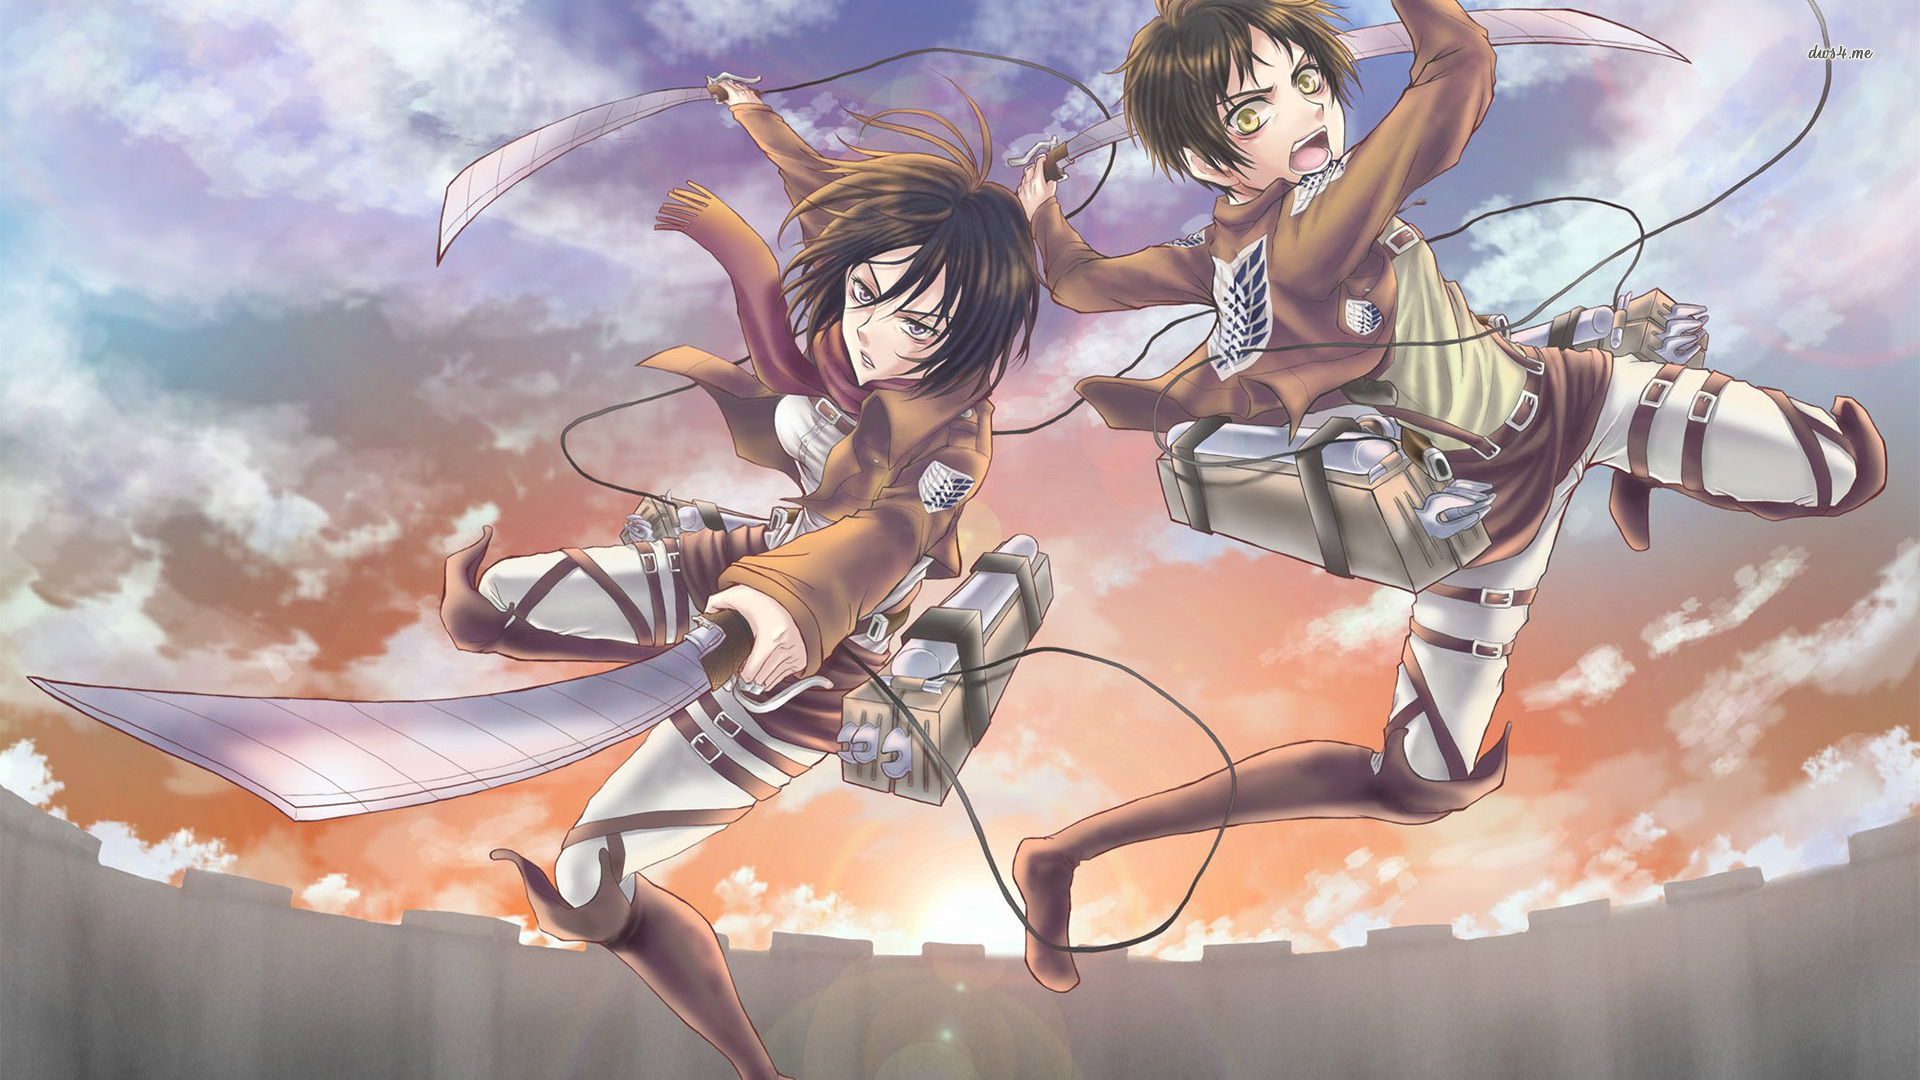 Long Hair, Anime, Attack On Titan, Illustration, Fictional - Attack On Titan Wallpaper Mikasa And Eren , HD Wallpaper & Backgrounds